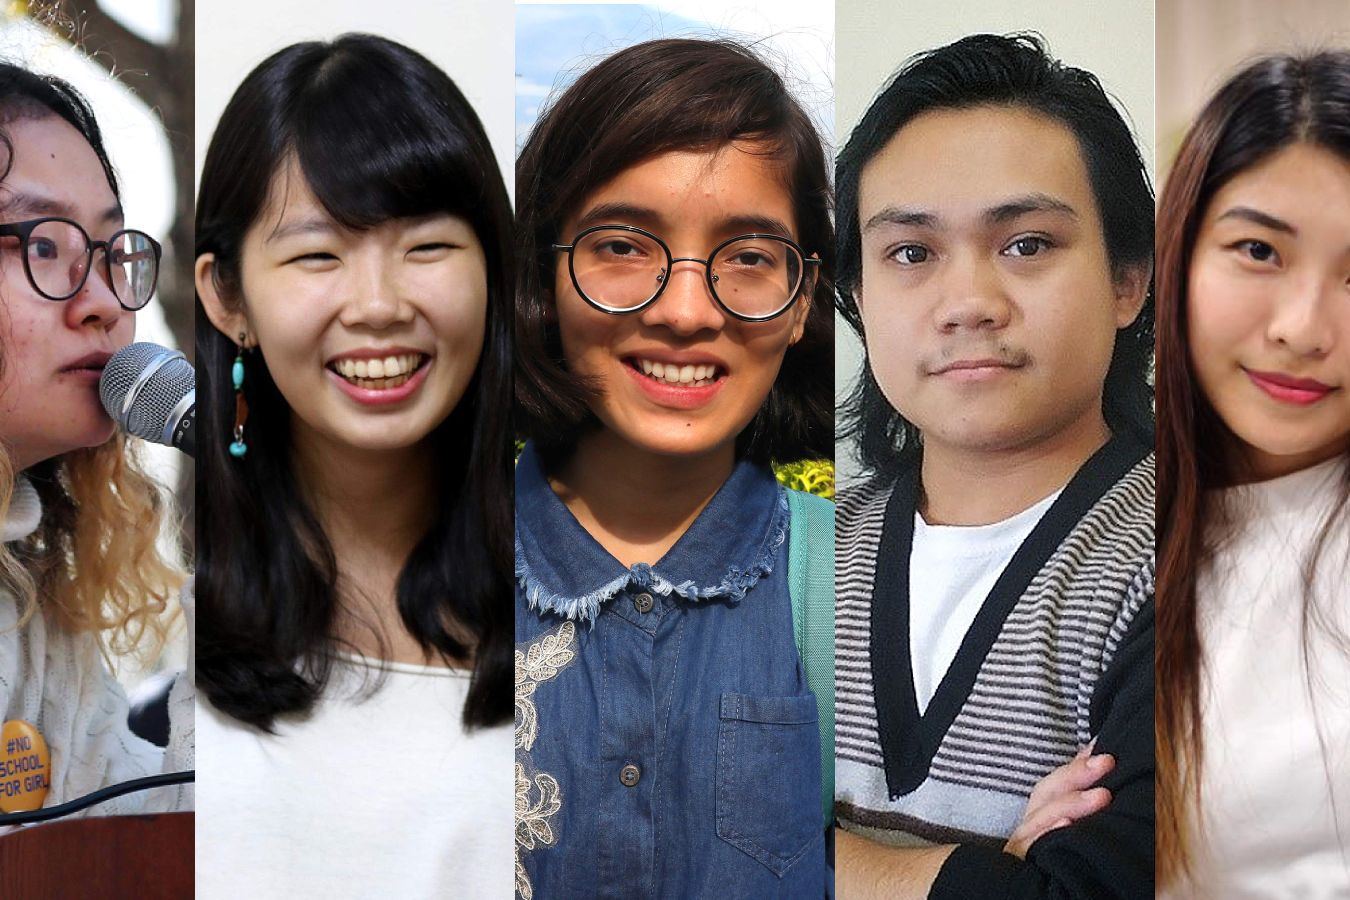 Yang Butigirl Partisex Fuck Video - Meet 5 young activists who drove change in Asia this year | CNN